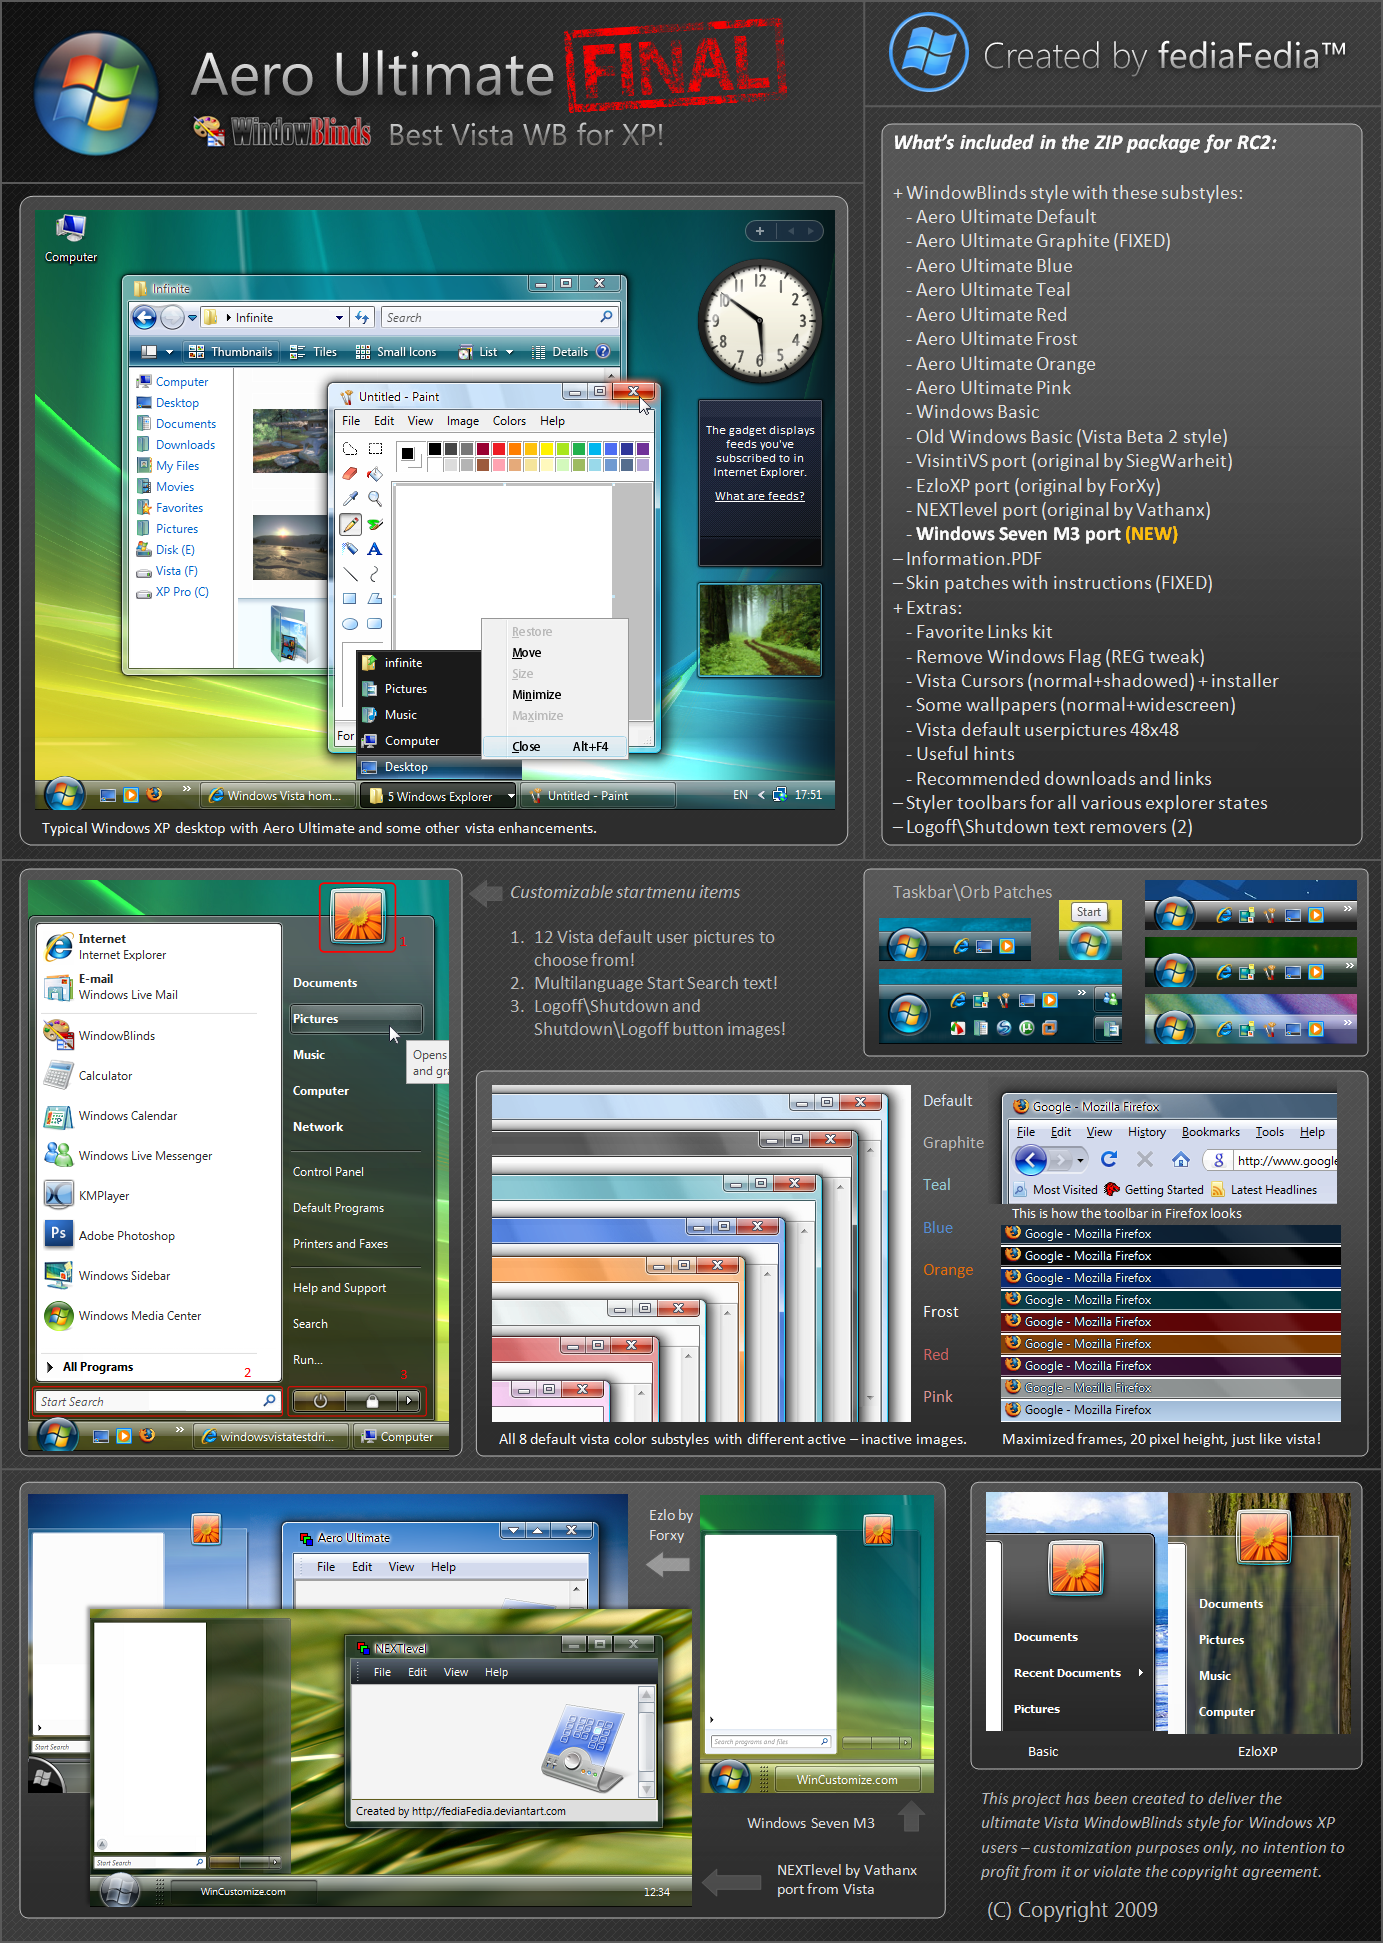 WINDOWBLINDS - WINCUSTOMIZE: YOUR HOME FOR WINDOWS 7 THEMES, VISTA